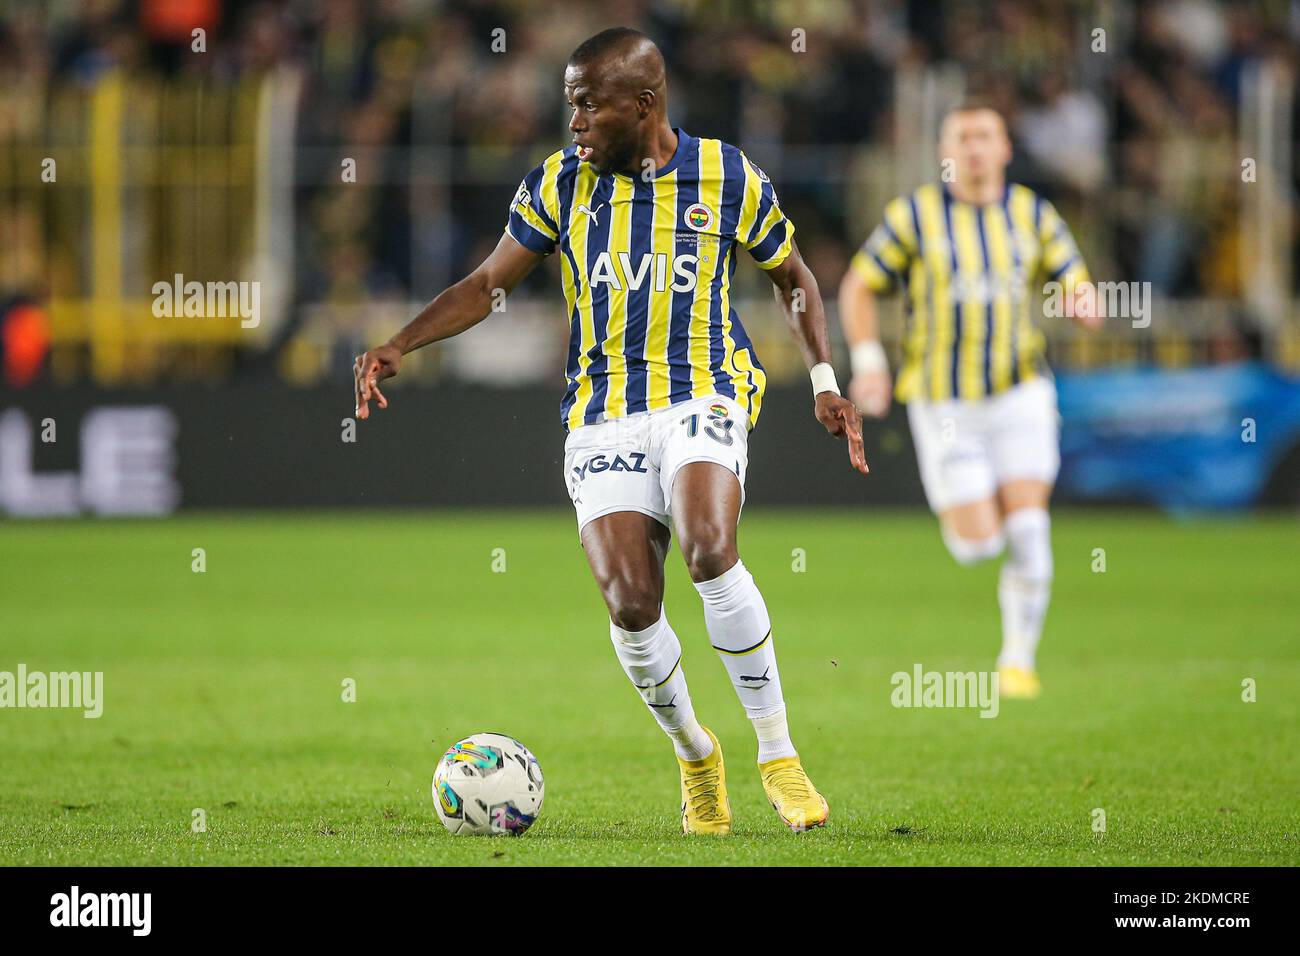 ISTANBUL, TURKEY - NOVEMBER 7: Enner Valencia of Fenerbahce during the Turkish Super Lig match between Fenerbahce and Sivasspor at Sukru Saracoglu Stadium on November 7, 2022 in Istanbul, Turkey (Photo by Orange Pictures) Stock Photo